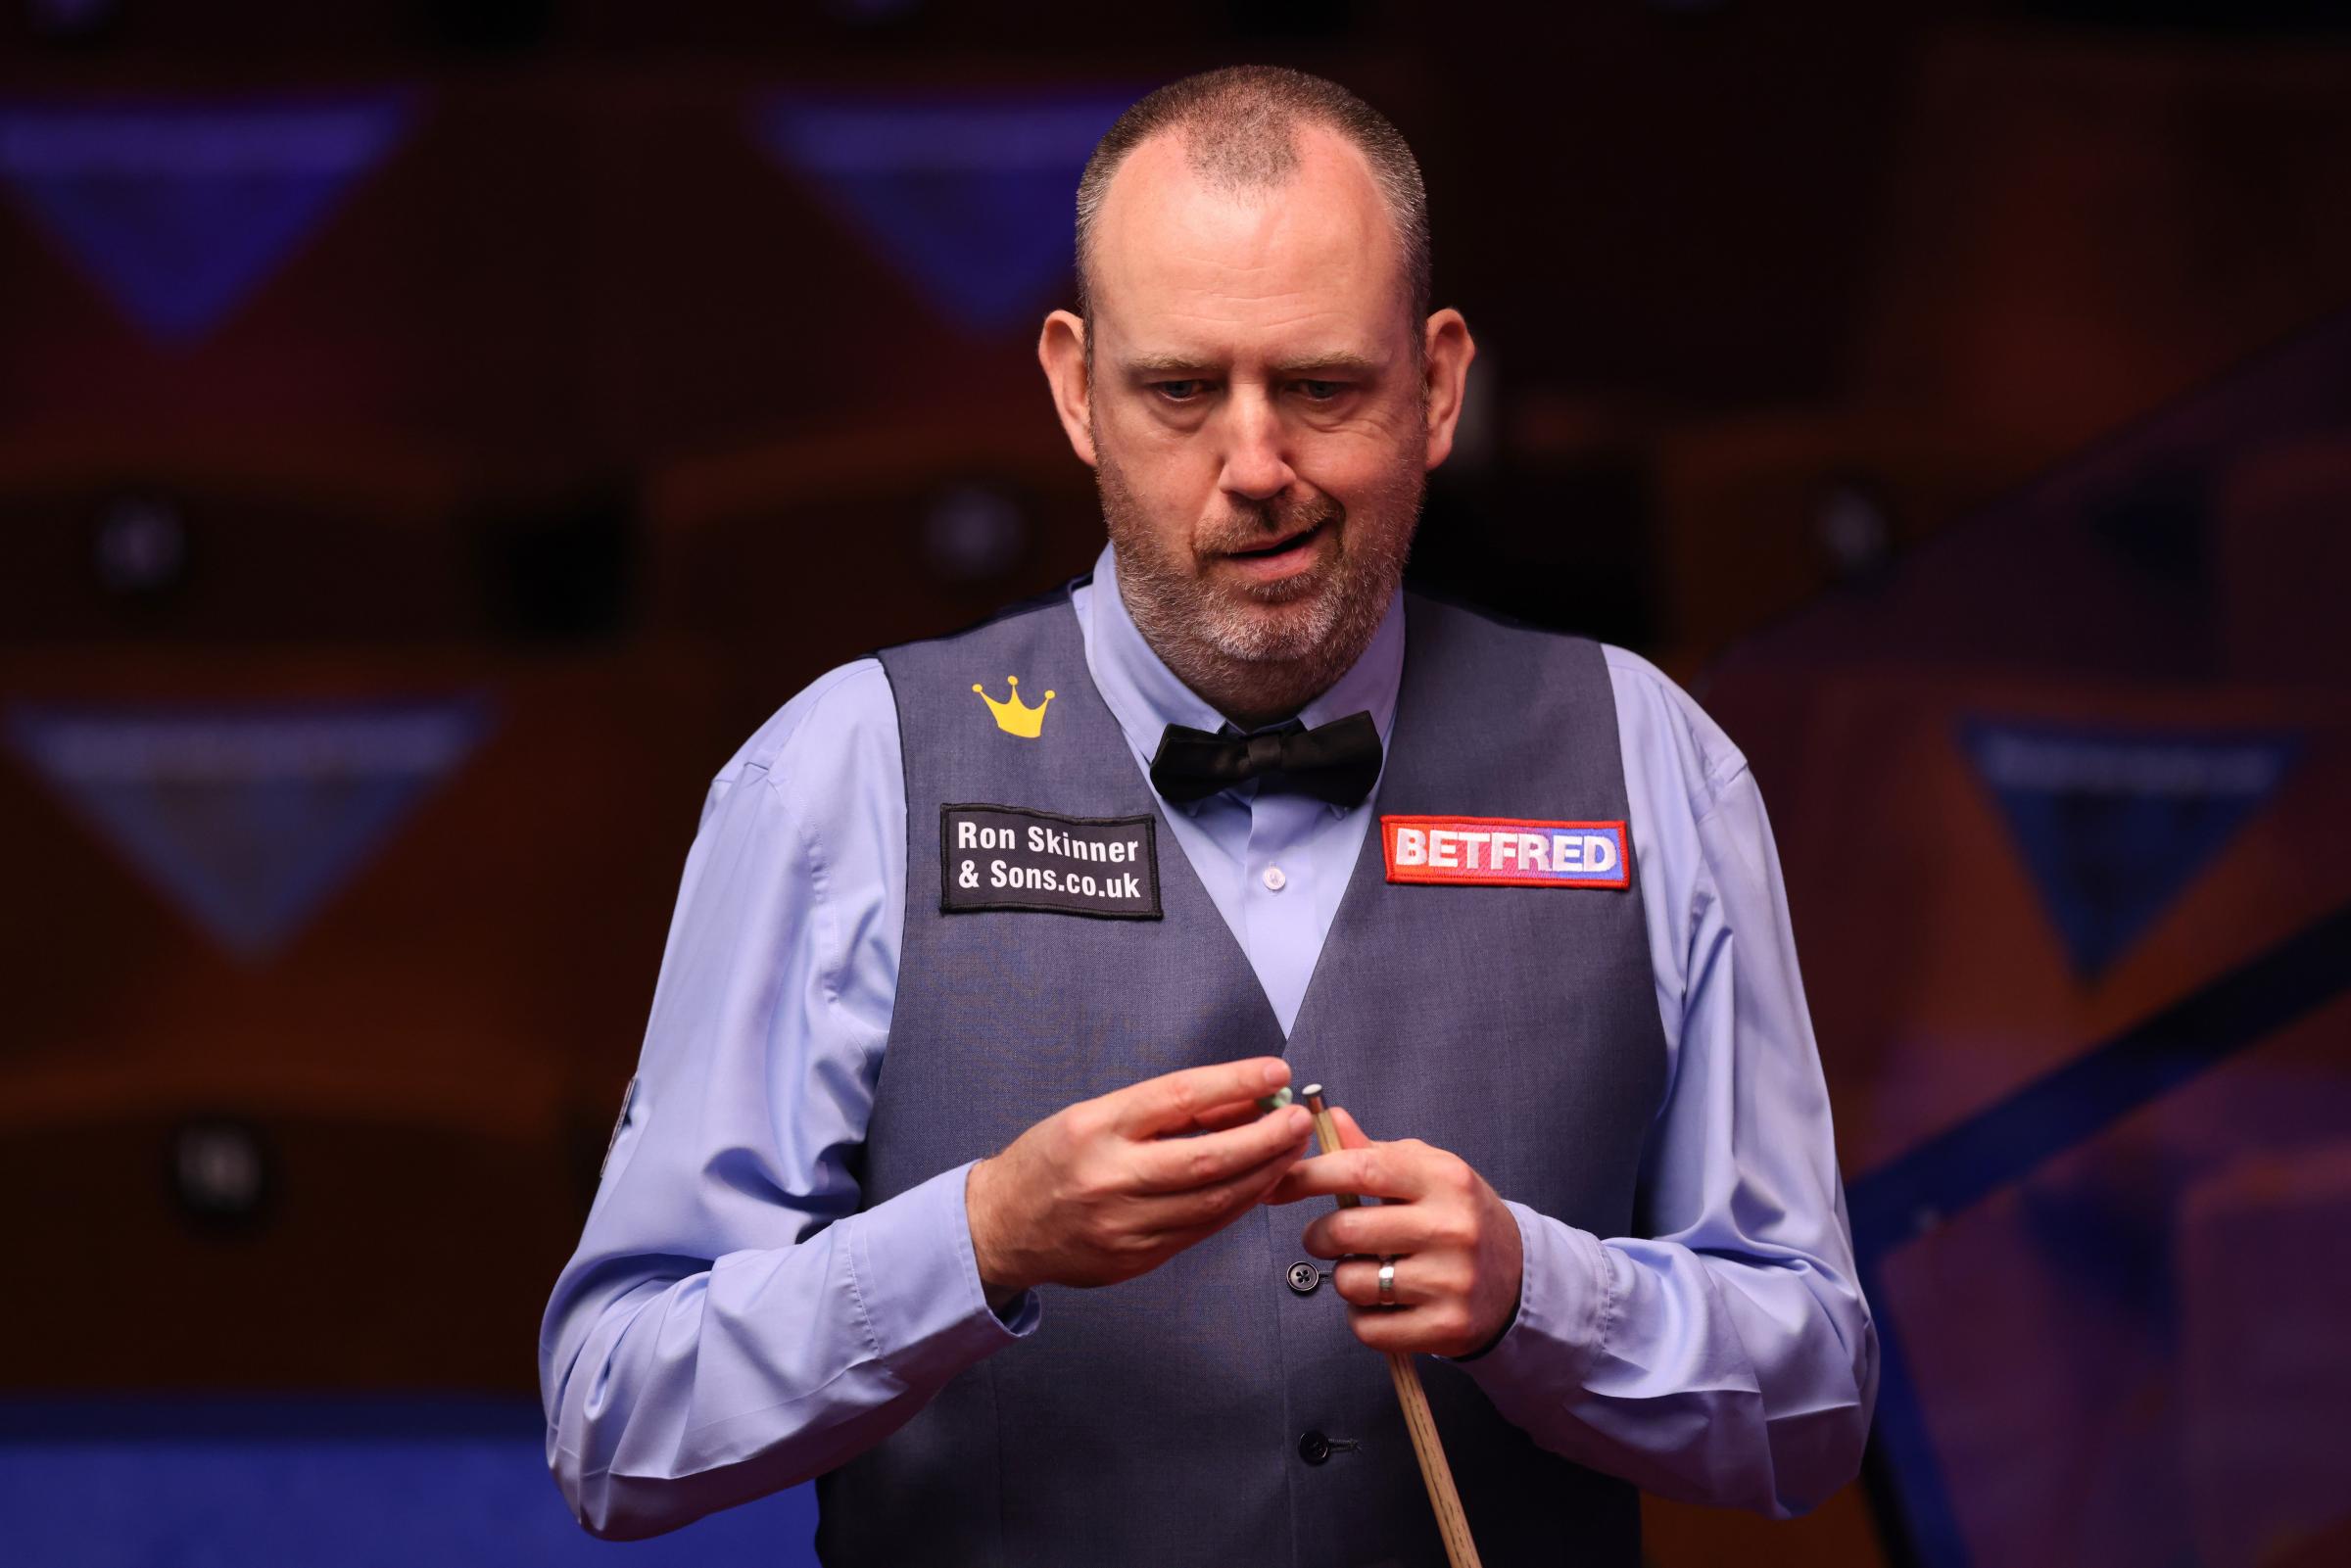 Mark Williams in action during day five of the Betfred World Snooker Championships 2021 at The Crucible, Sheffield. Picture date: Wednesday April 21, 2021.